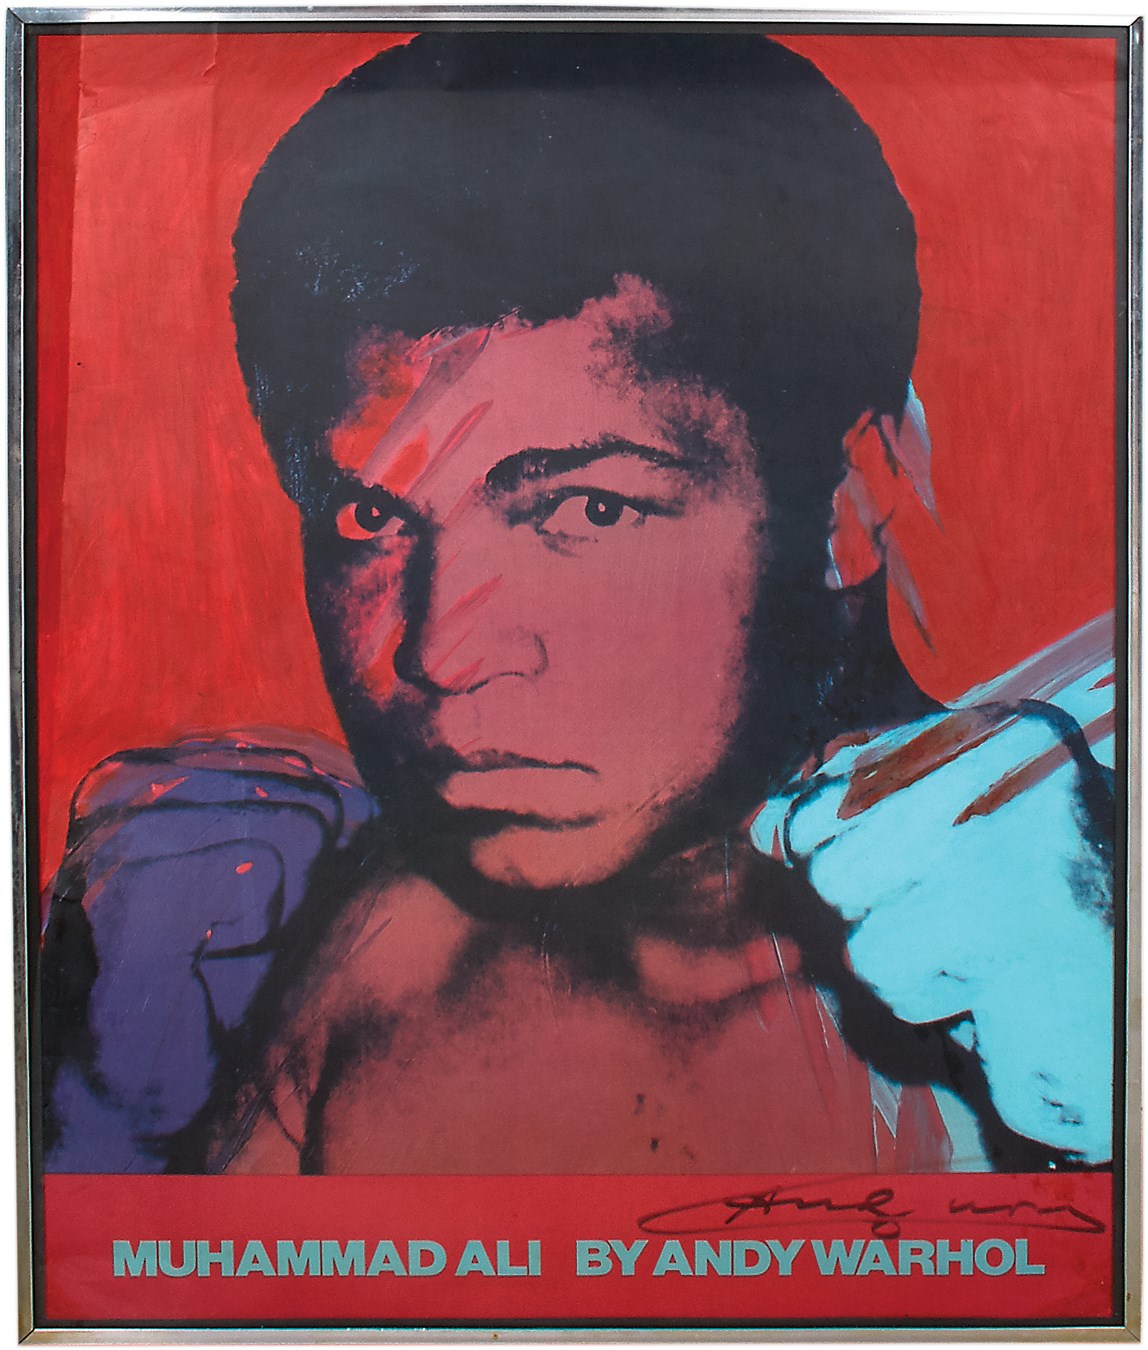 1978 Muhammad Ali Andy Warhol Exhibition Poster Artist Signed by Andy Warhol (PSA)